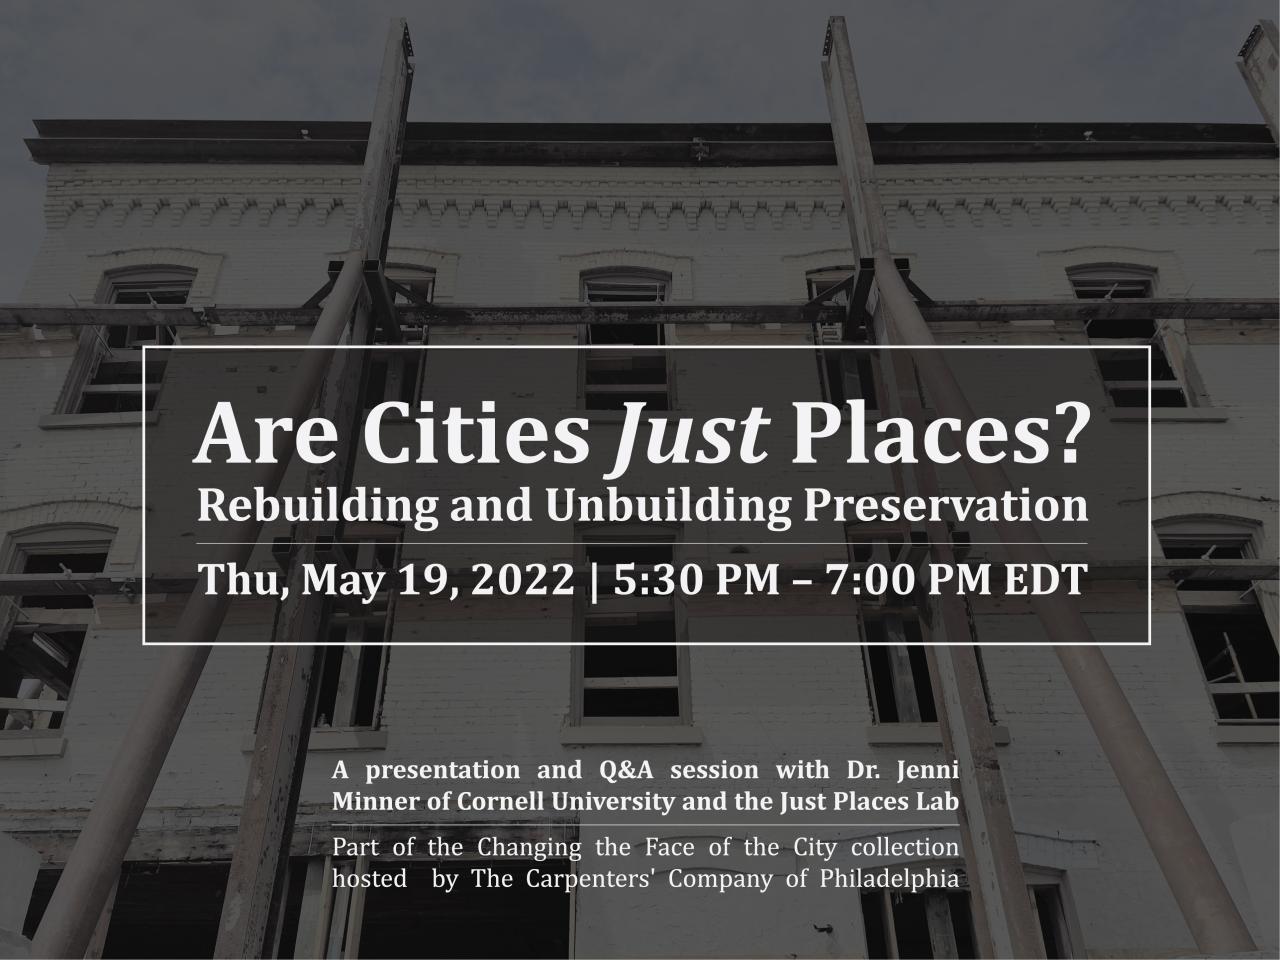 Poster for 'Are Cities Just Places?' presentation